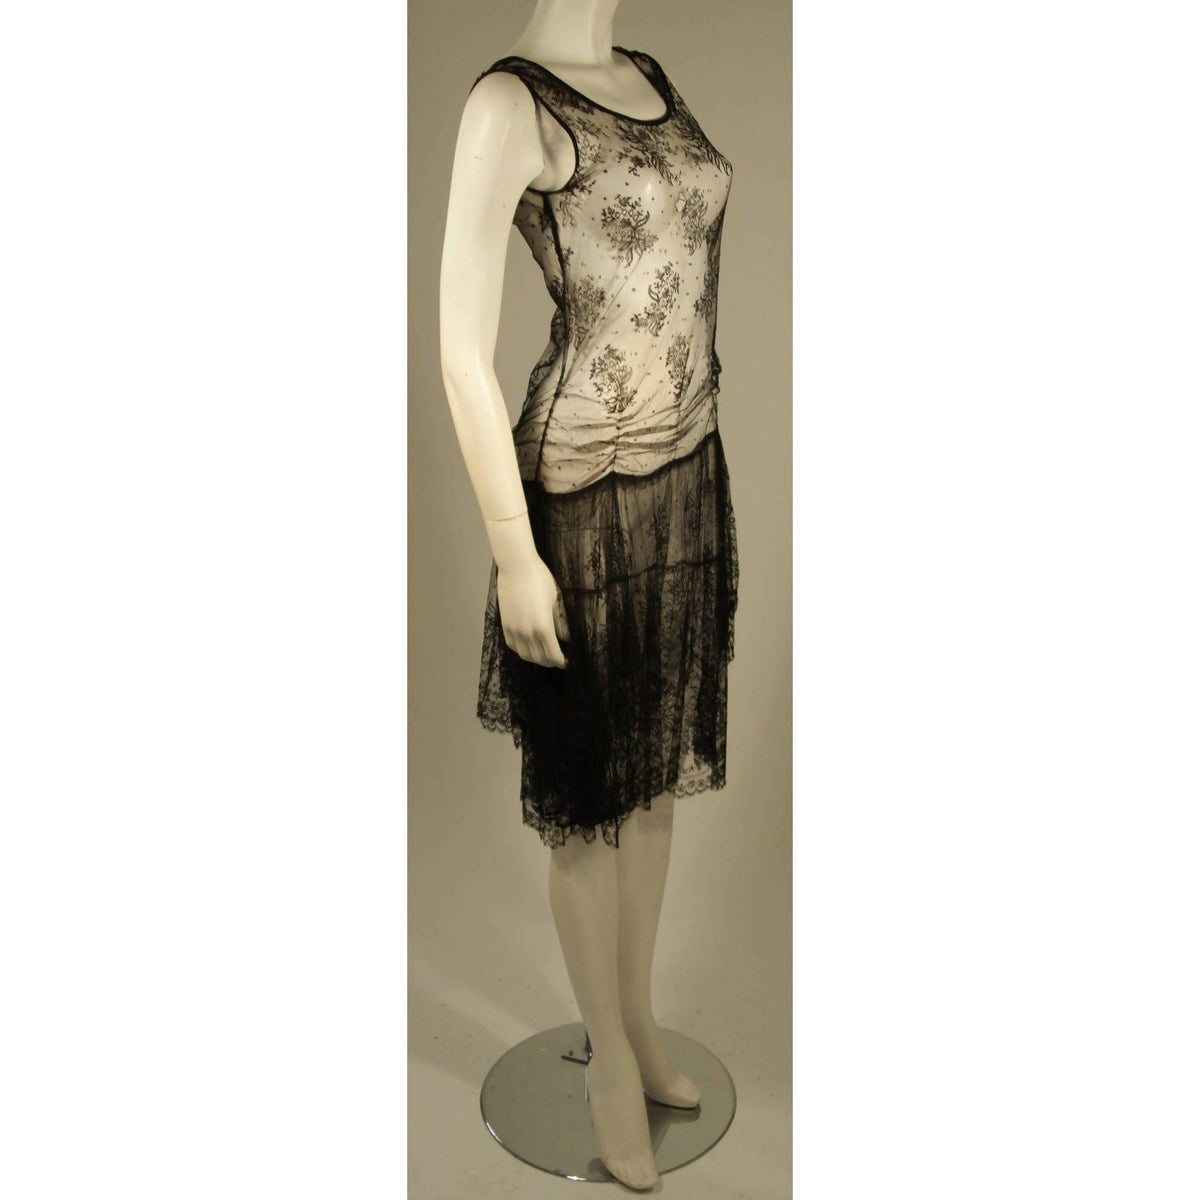 Pre-Owned Black Drop Waist French Lace Dress | Size S/M - theREMODA